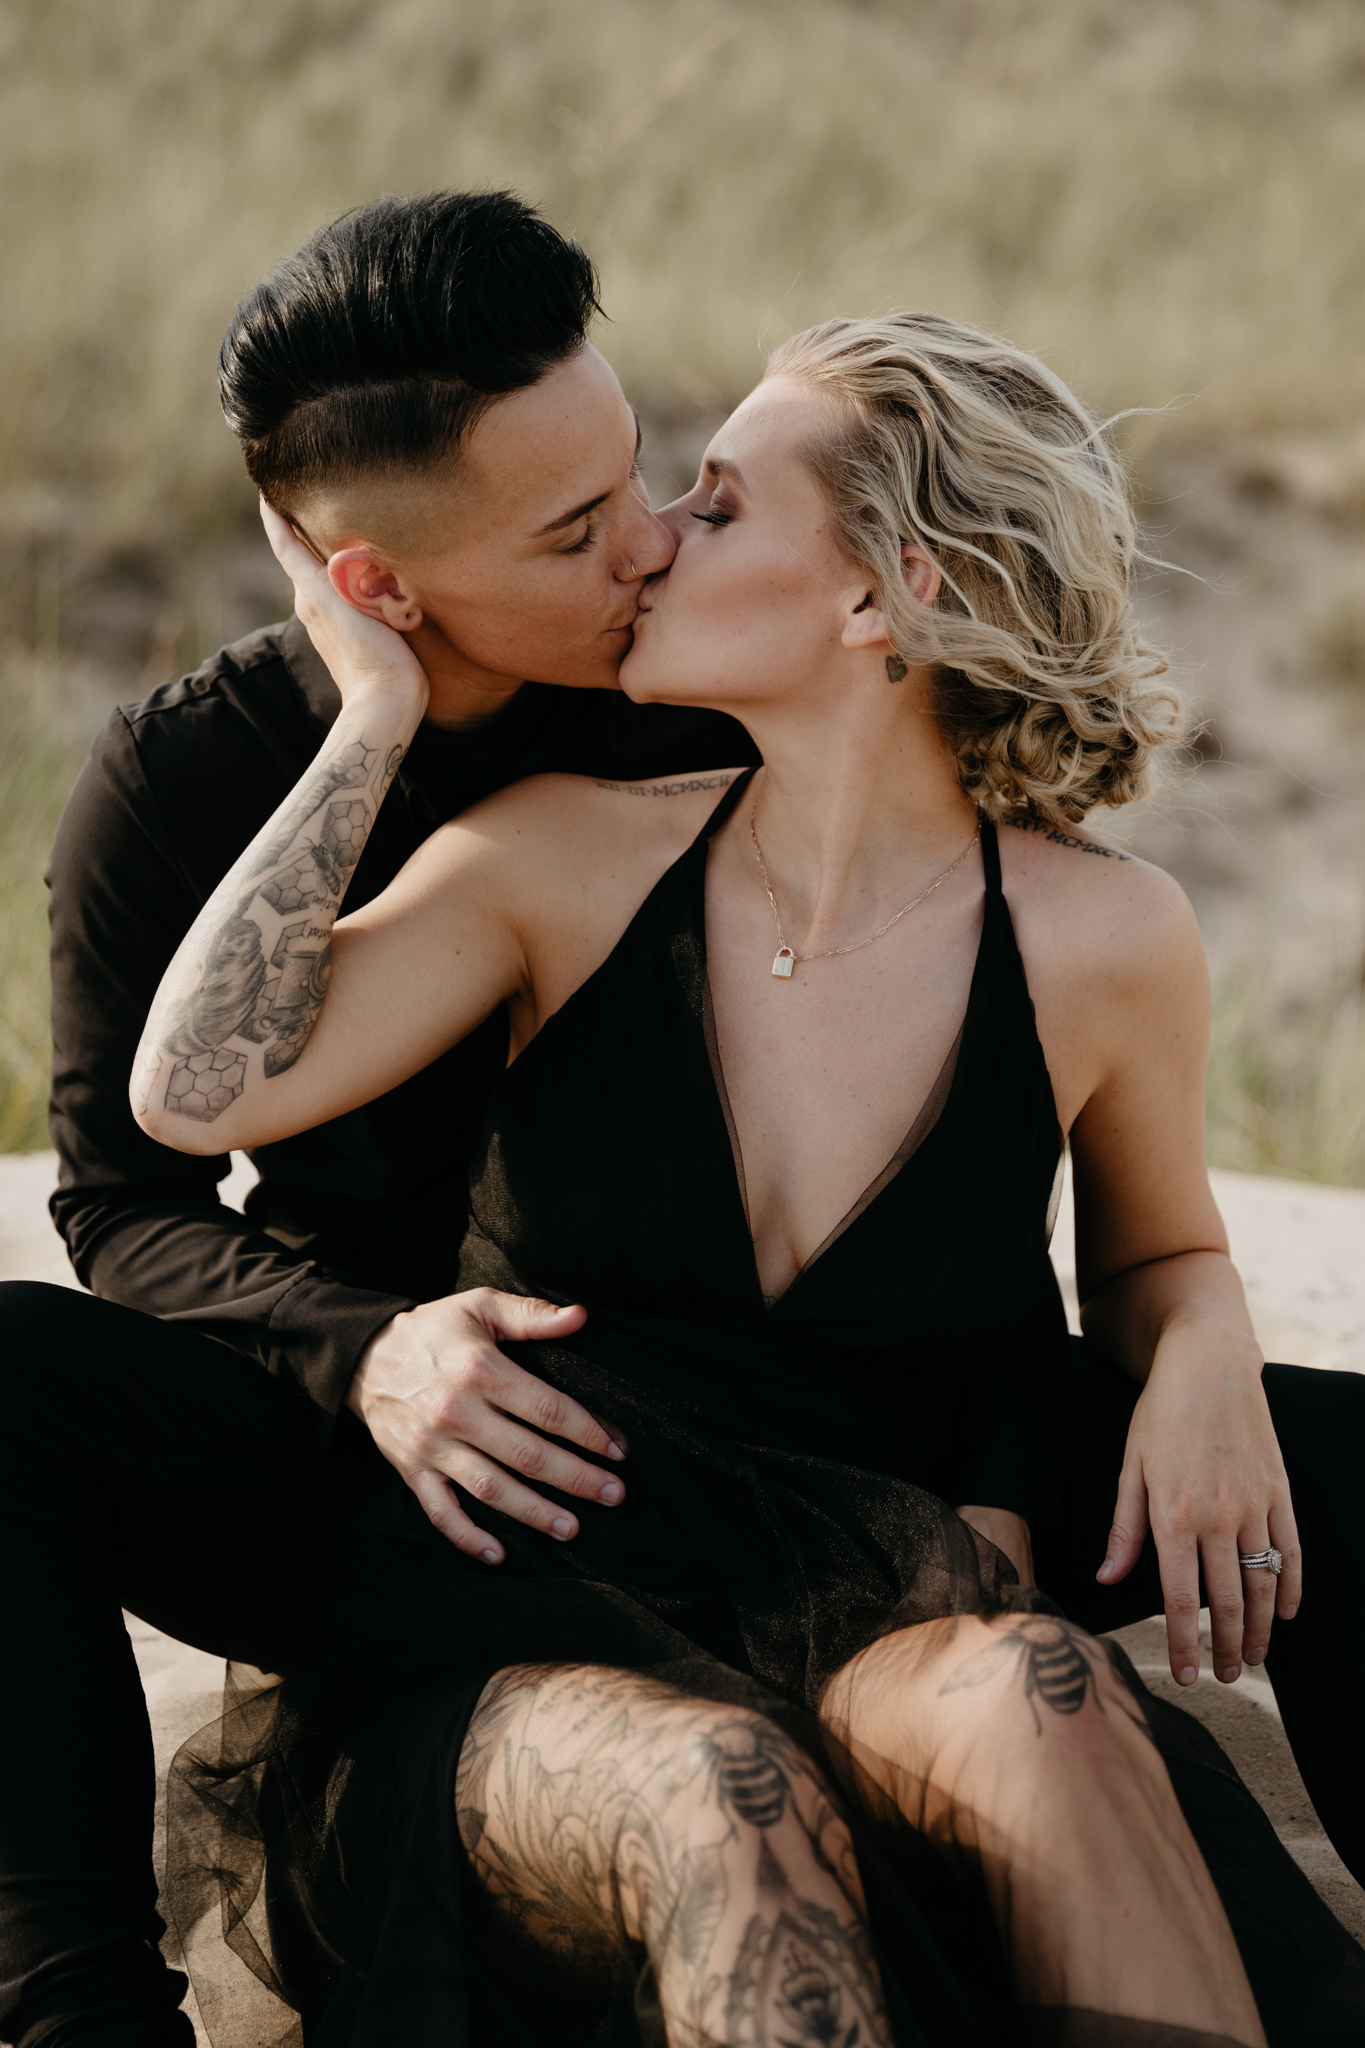 This Epic LGBTQ Lake Michigan Elopement has all the moody vibes